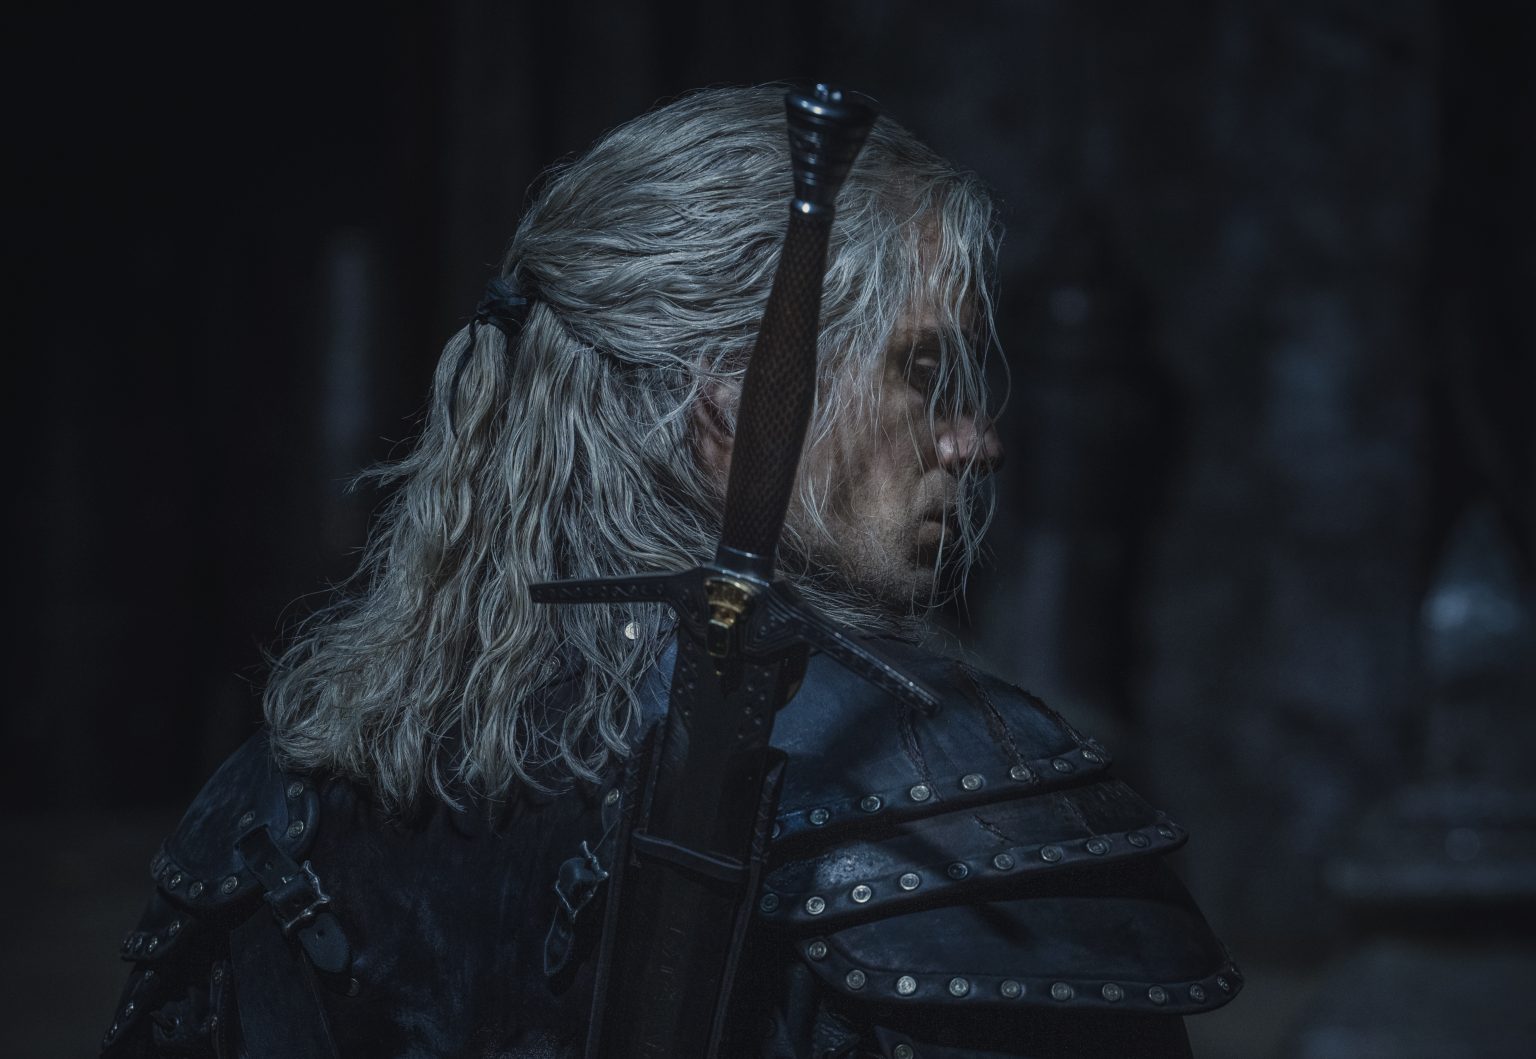 Henry Cavill as Geralt of Rivia looking over his shoulder with his sword on his back as seen in season 2 of THE WITCHER, coming to Netflix in December 2021.